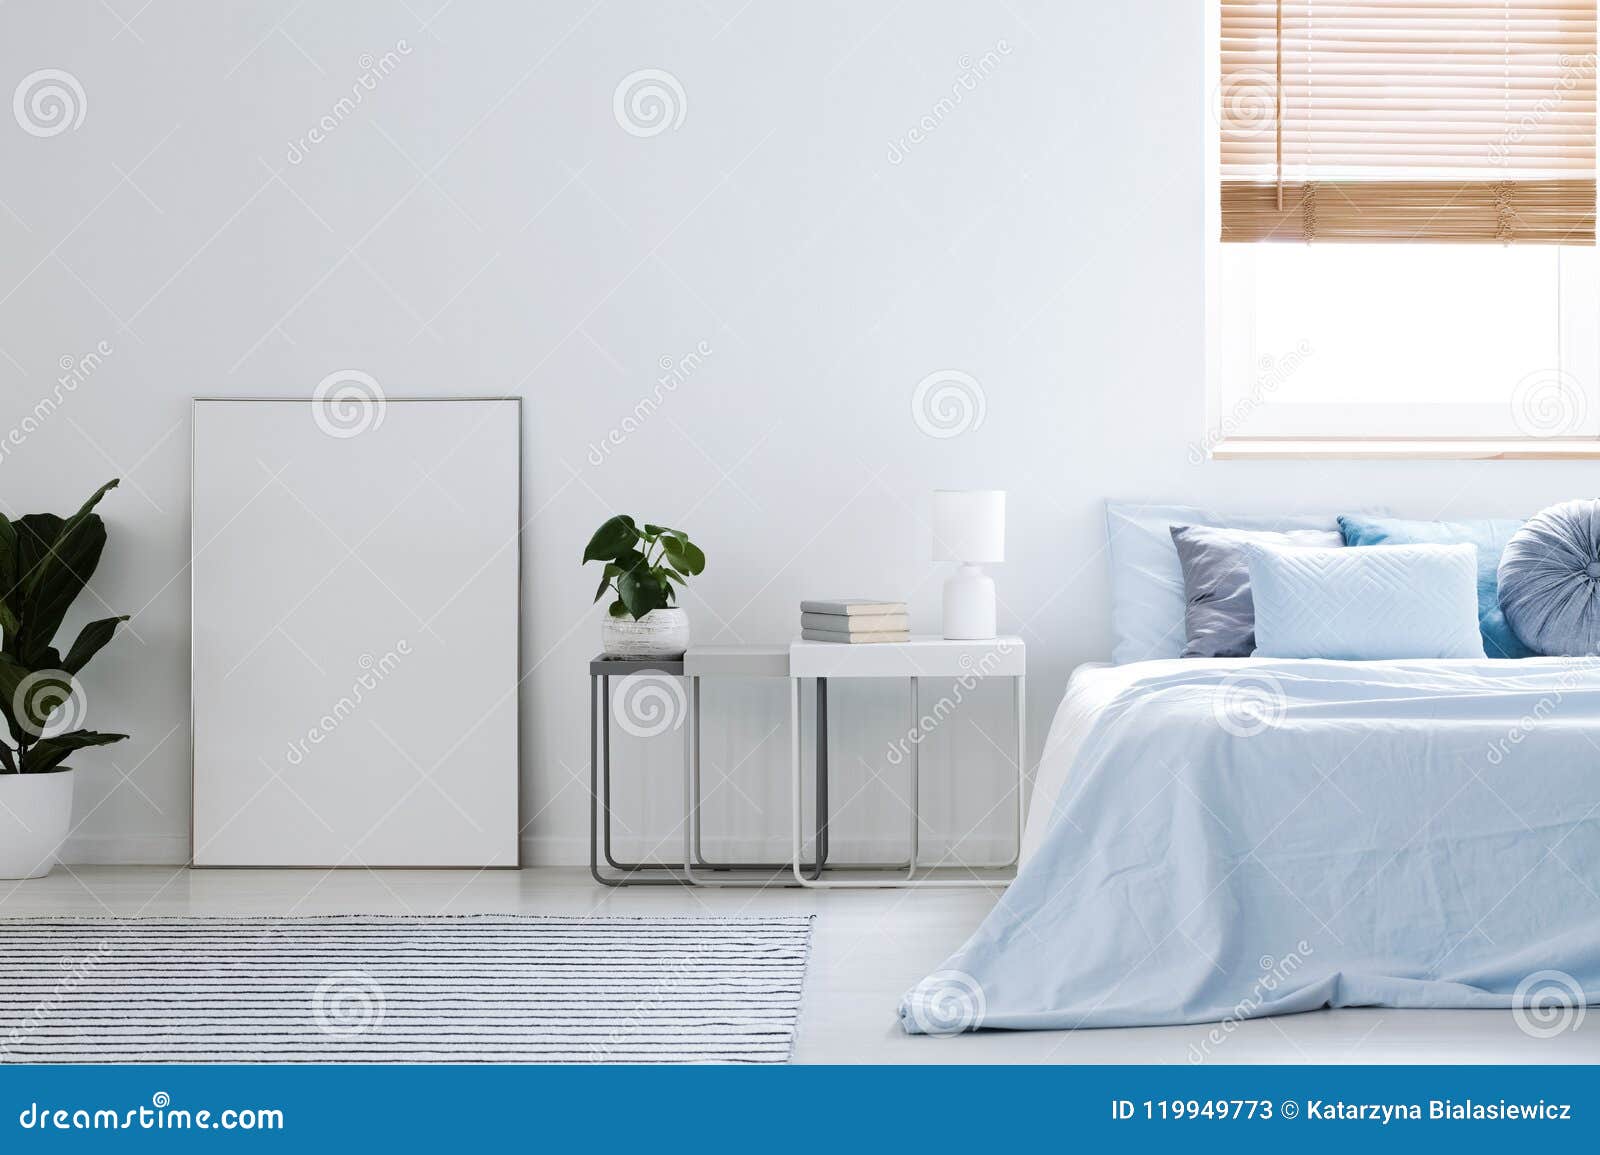 Download Mockup Of White Empty Poster In Simple Hotel Bedroom Interior Wi Stock Image Image Of Copy Sheets 119949773 PSD Mockup Templates